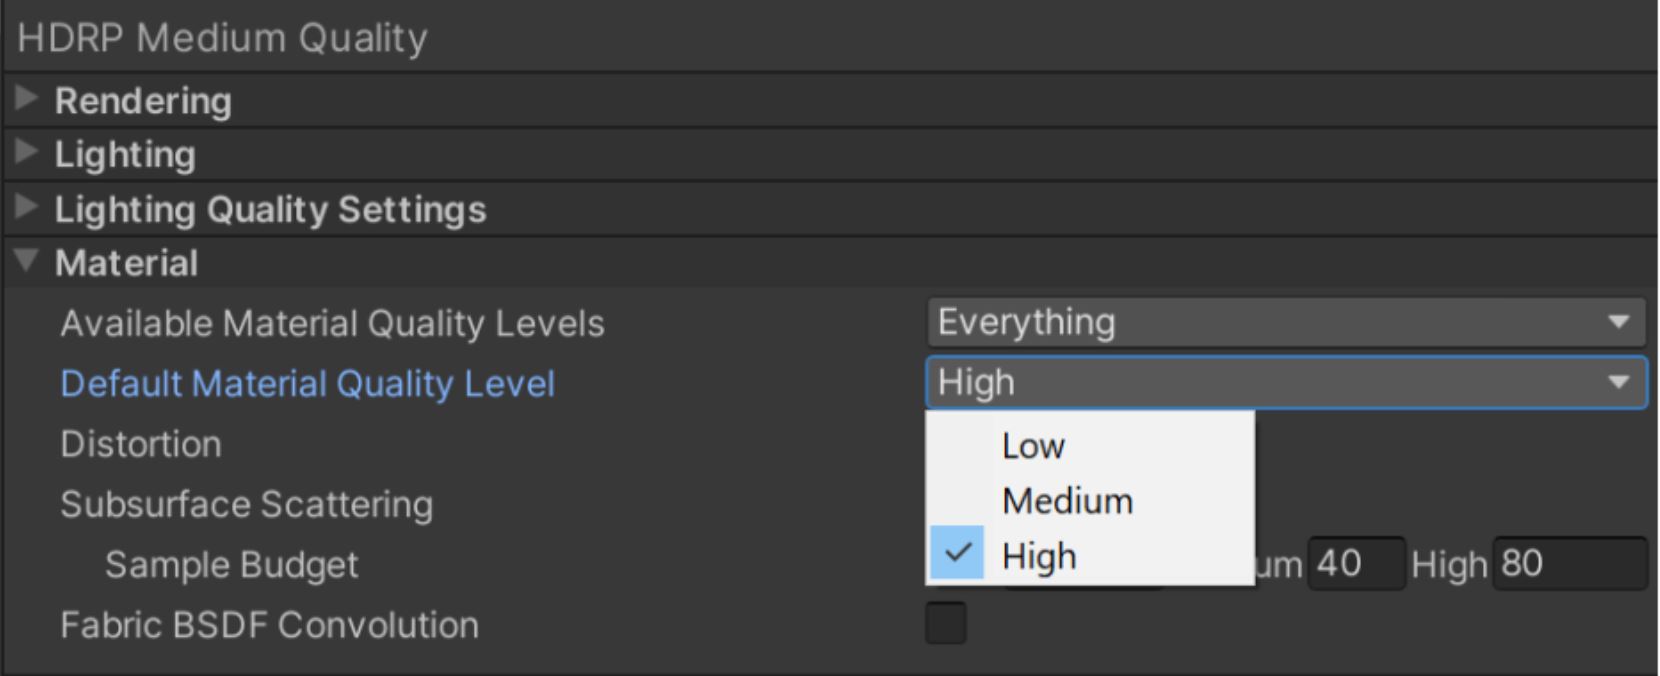 The Available Material Quality Levels and Default Material Quality Level